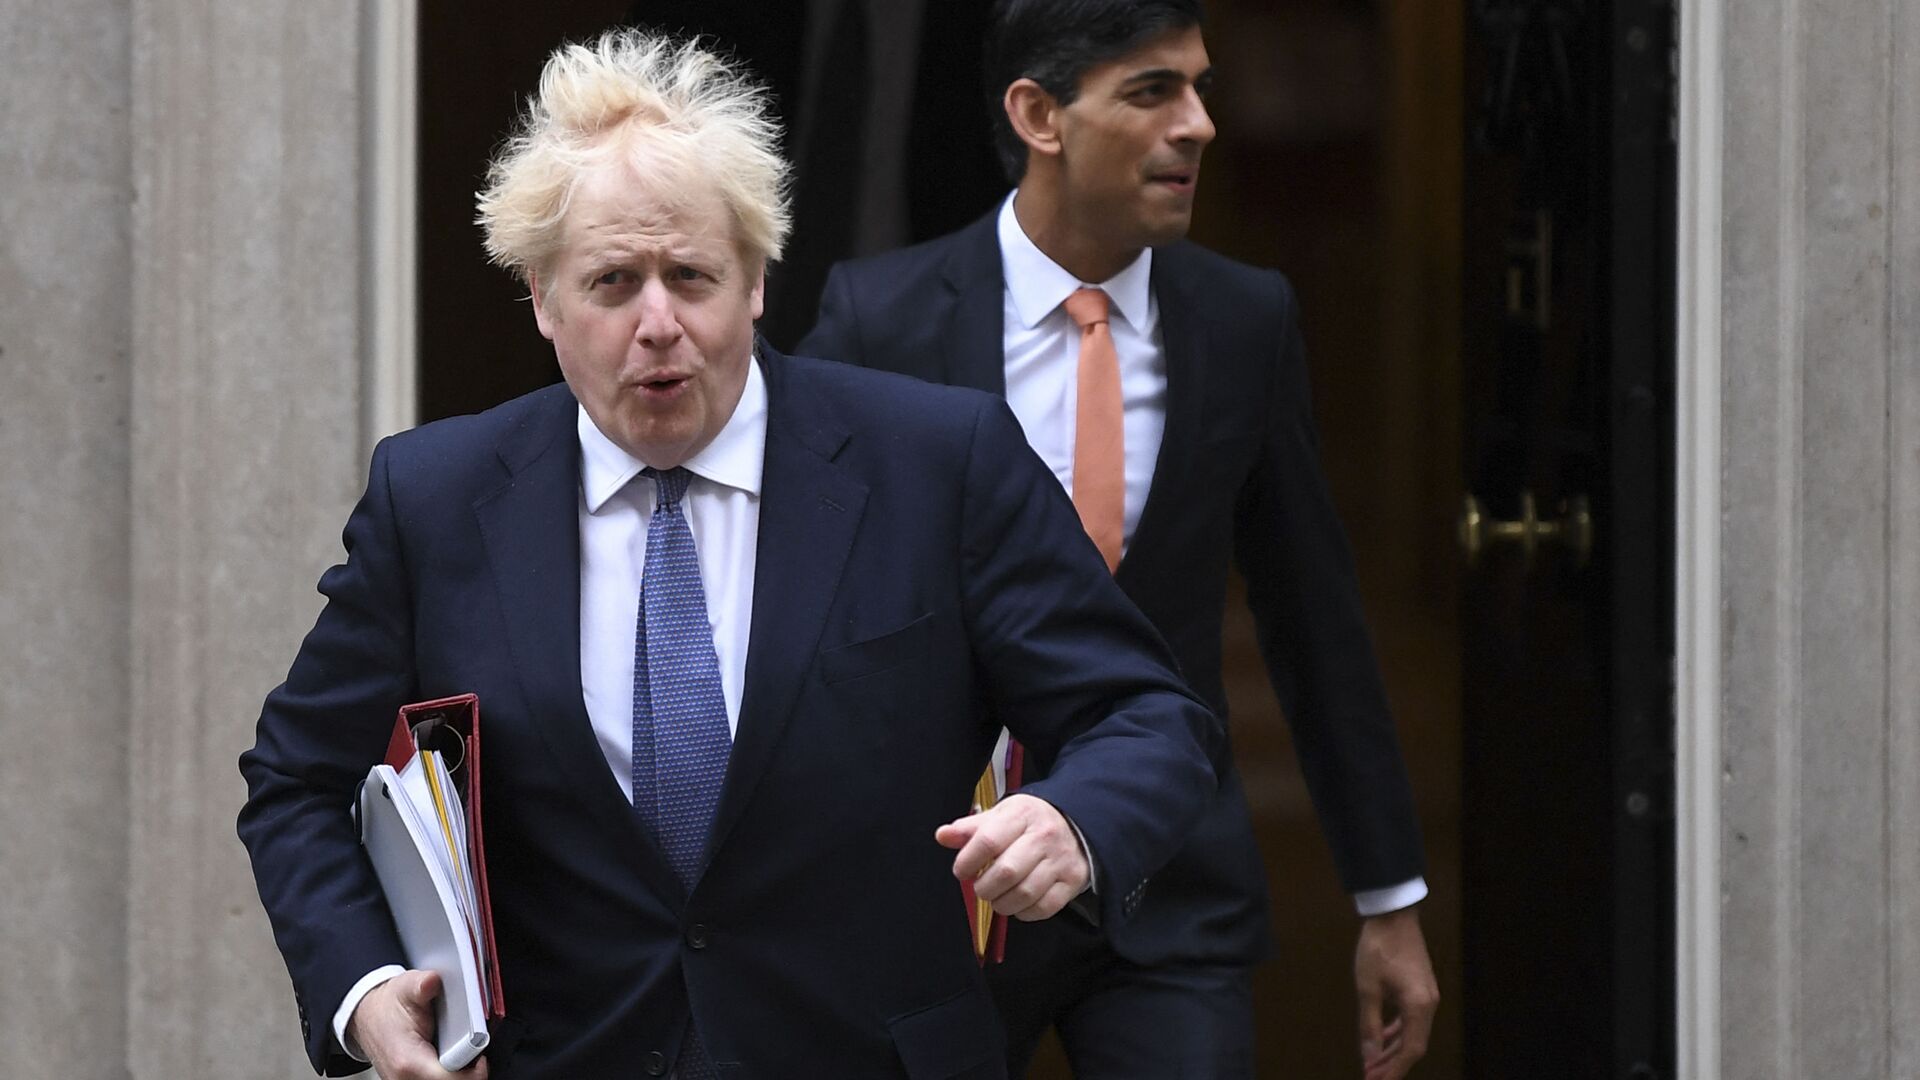 Britain's Prime Minister Boris Johnson (L) and Britain's Chancellor of the Exchequer Rishi Sunak (R) leave 10 Downing Street to attend the weekly cabinet meeting in London on October 13, 2020 held at the Foreign, Commonwealth and Development Office - Sputnik International, 1920, 17.10.2021